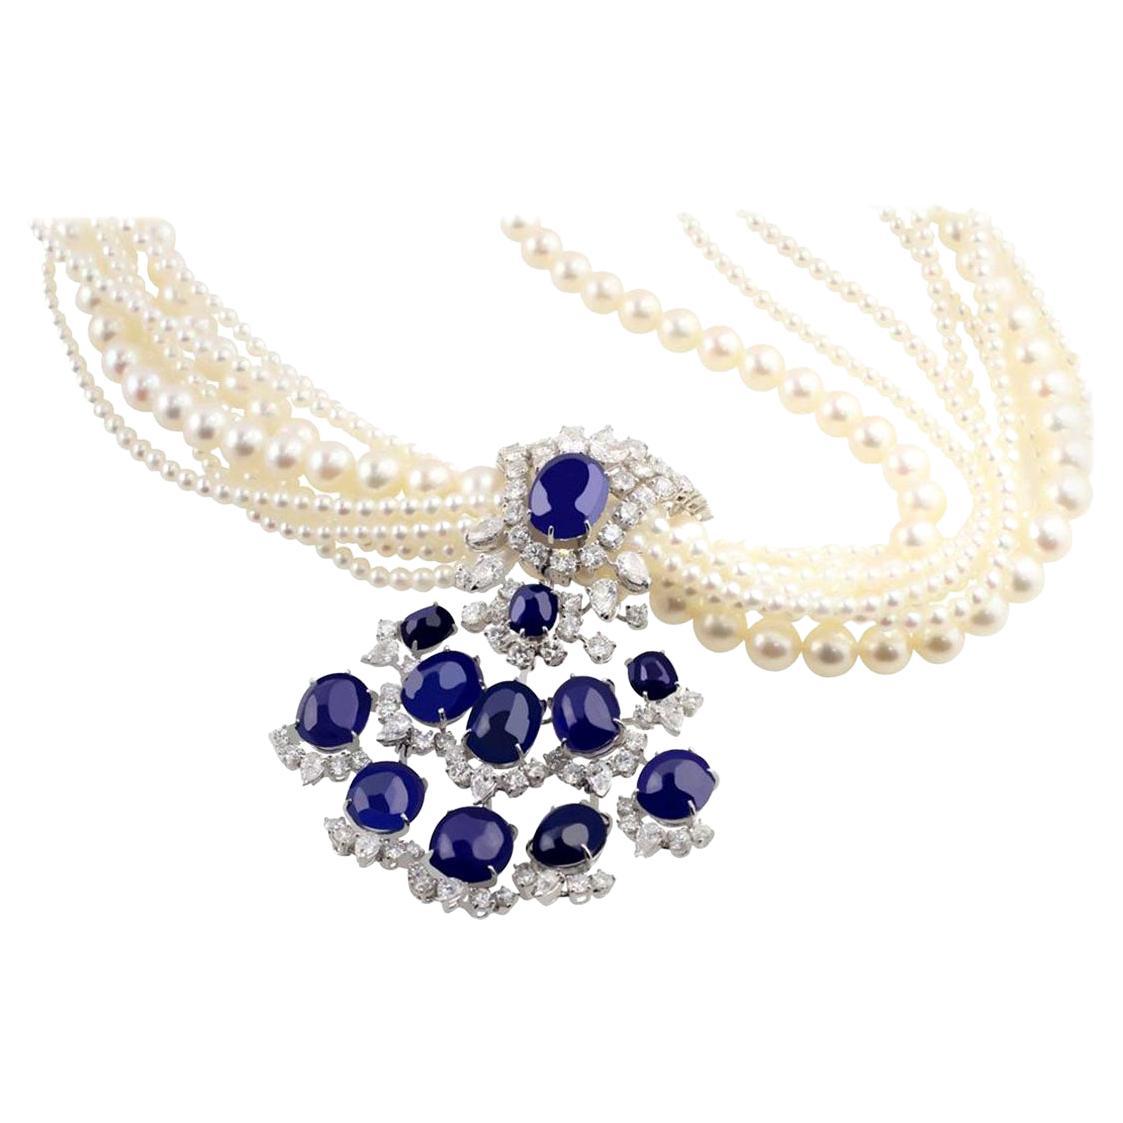 1950s 74.77 Carat Natural Unheated Burma Sapphire and Pearl Necklace For Sale